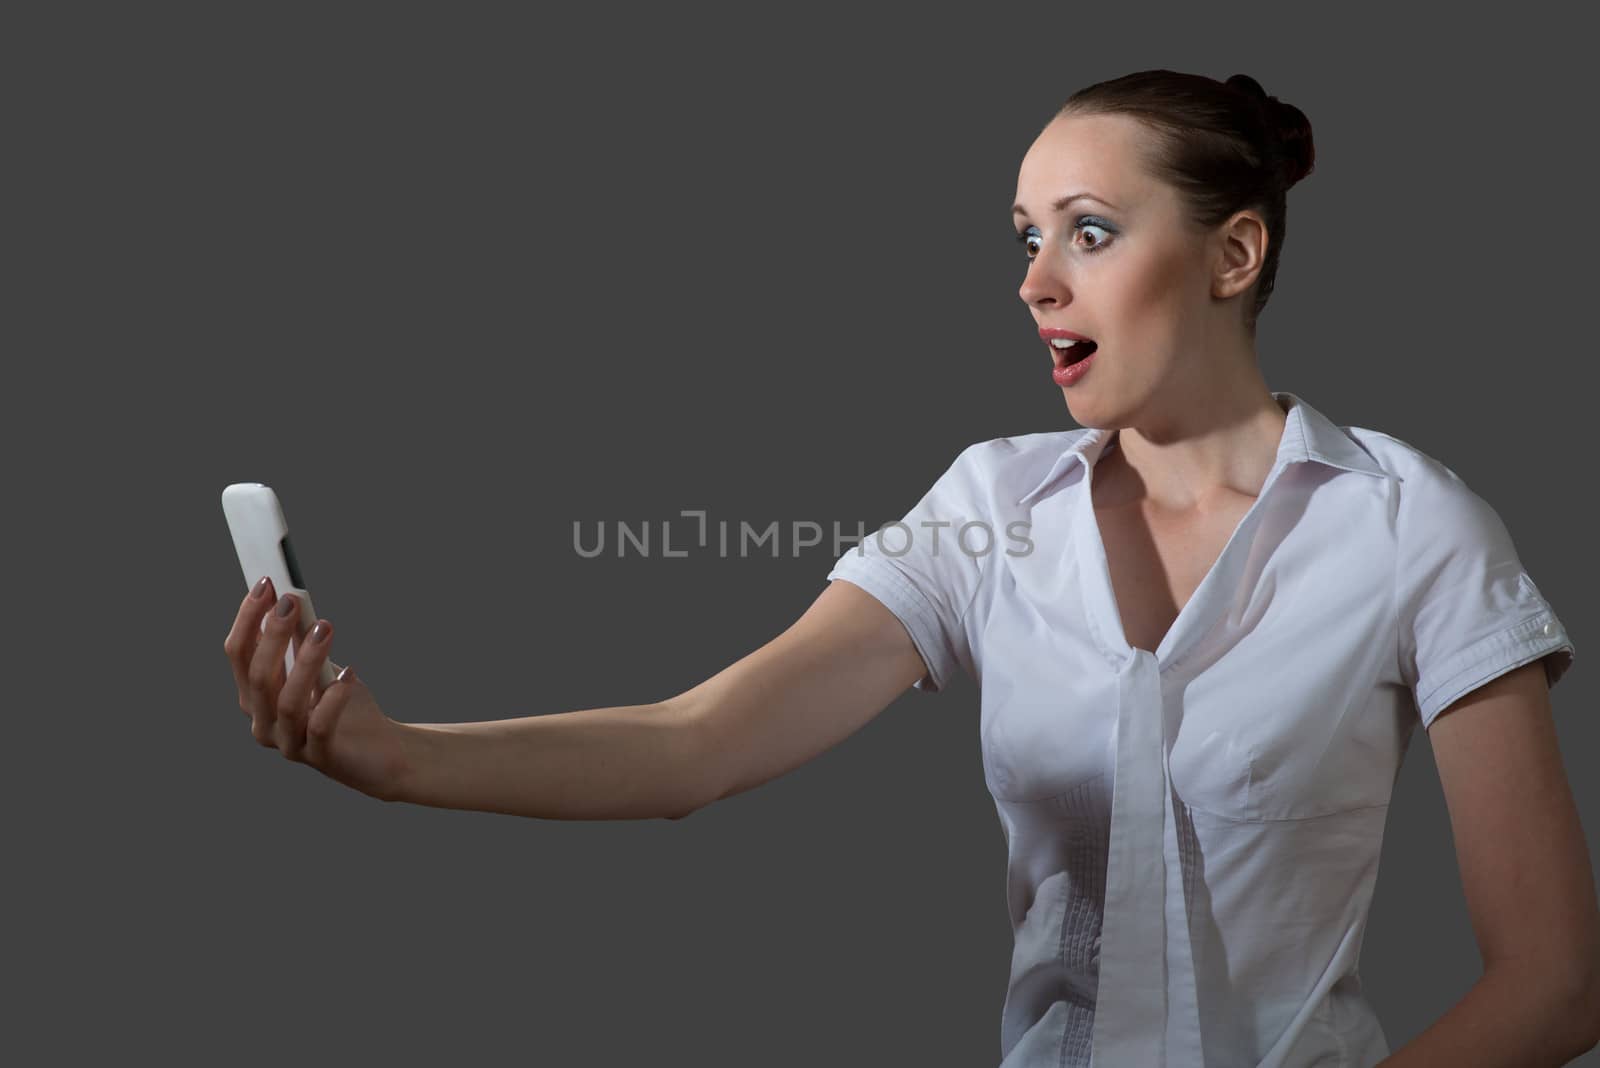 image of young business woman holding a cell phone